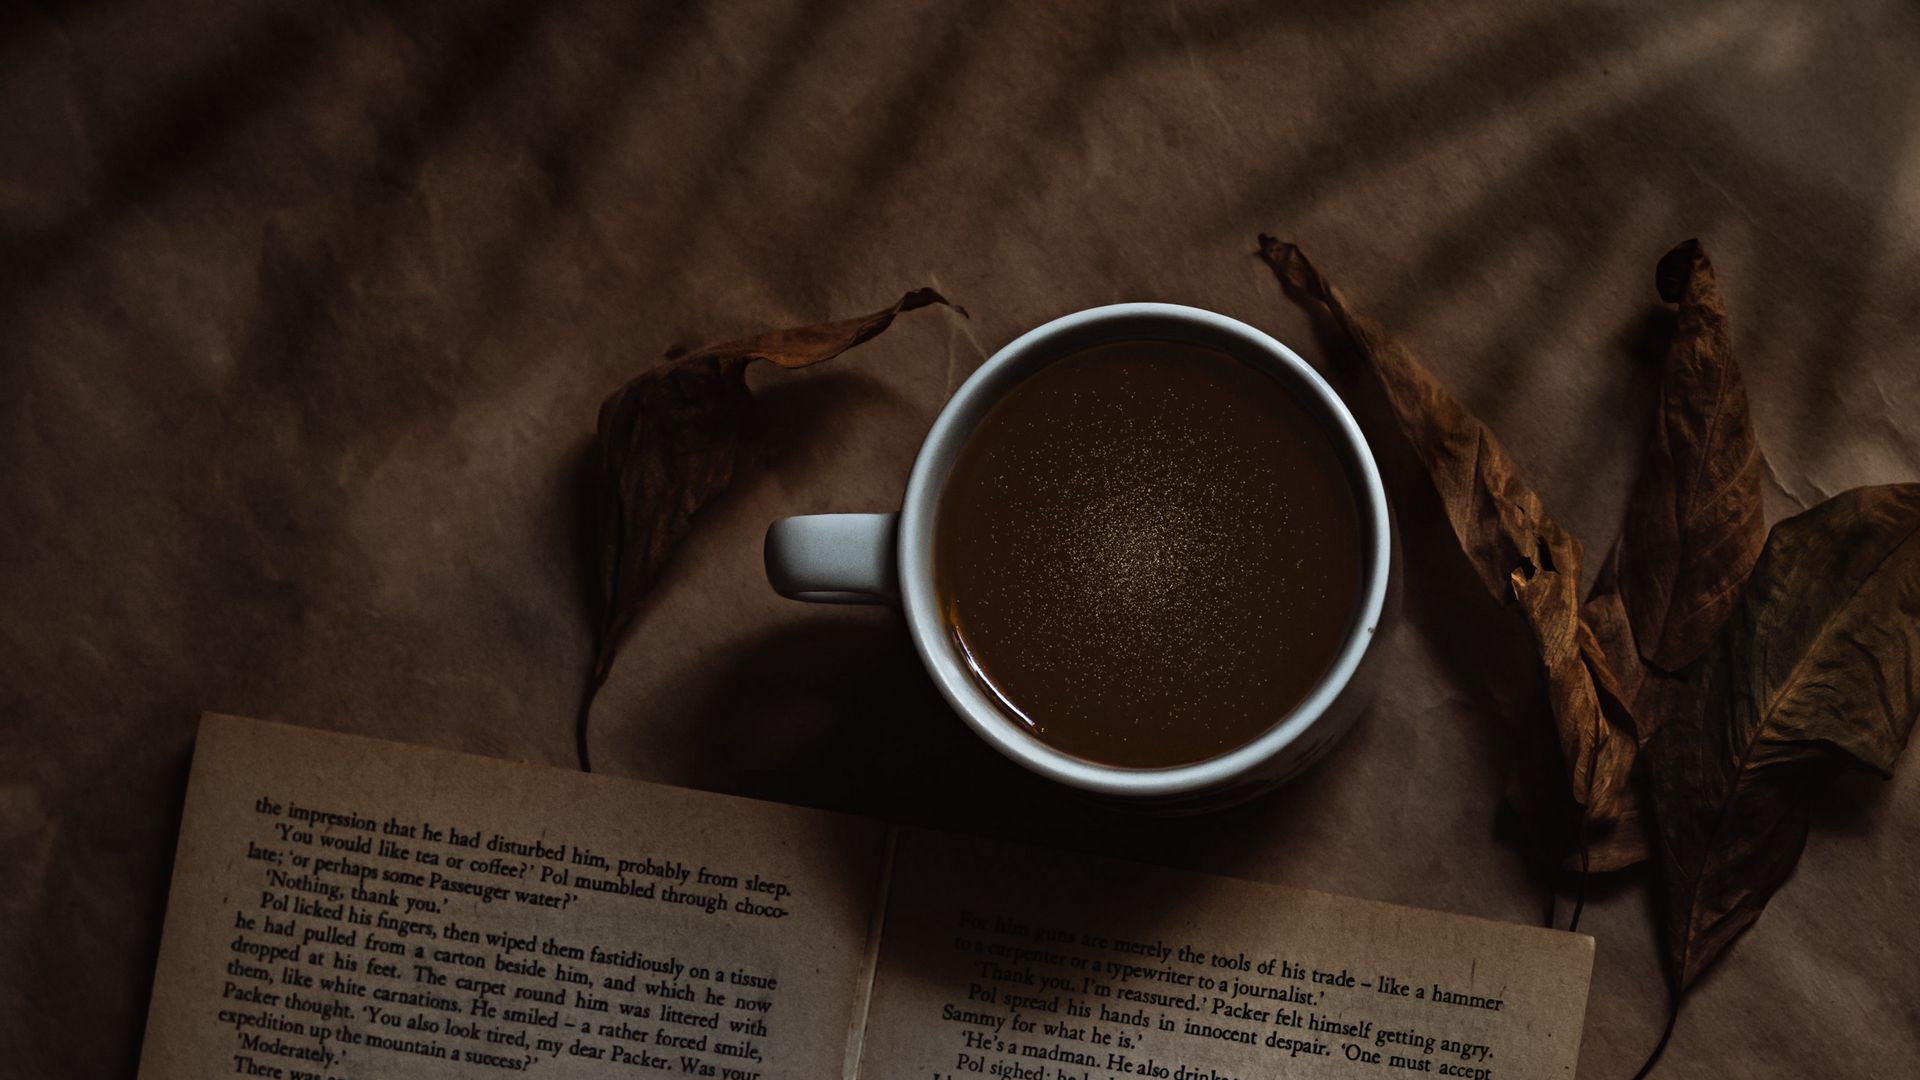 Download wallpaper 1920x1080 coffee, cup, book, headphones, text full hd,  hdtv, fhd, 1080p hd background